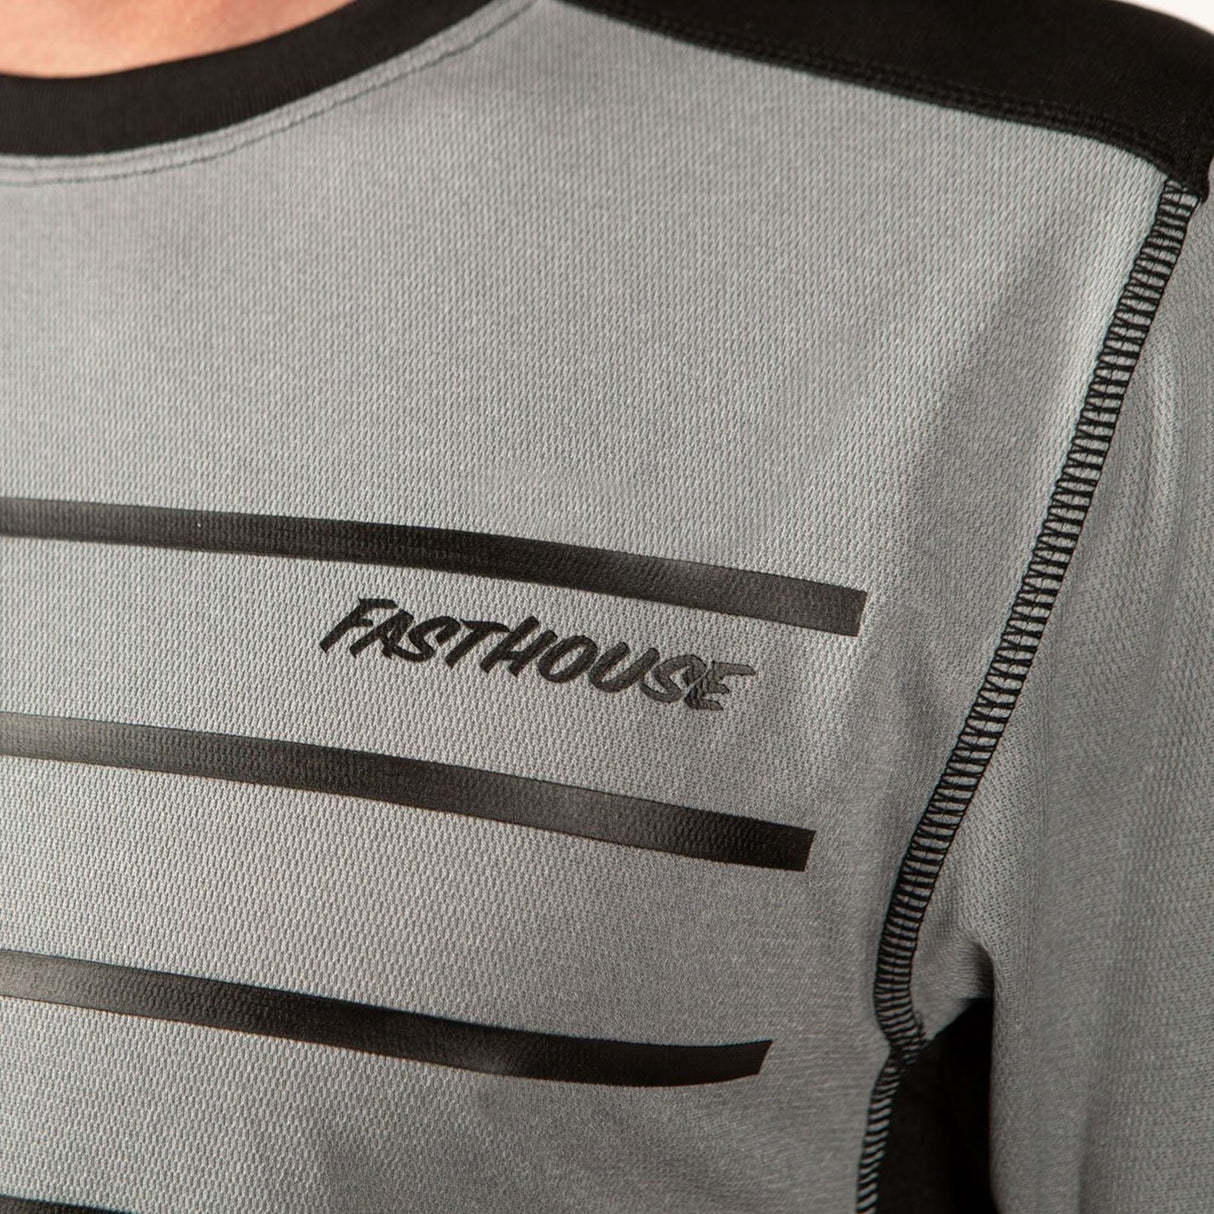 Maillot Fasthouse Classic Cartel MC